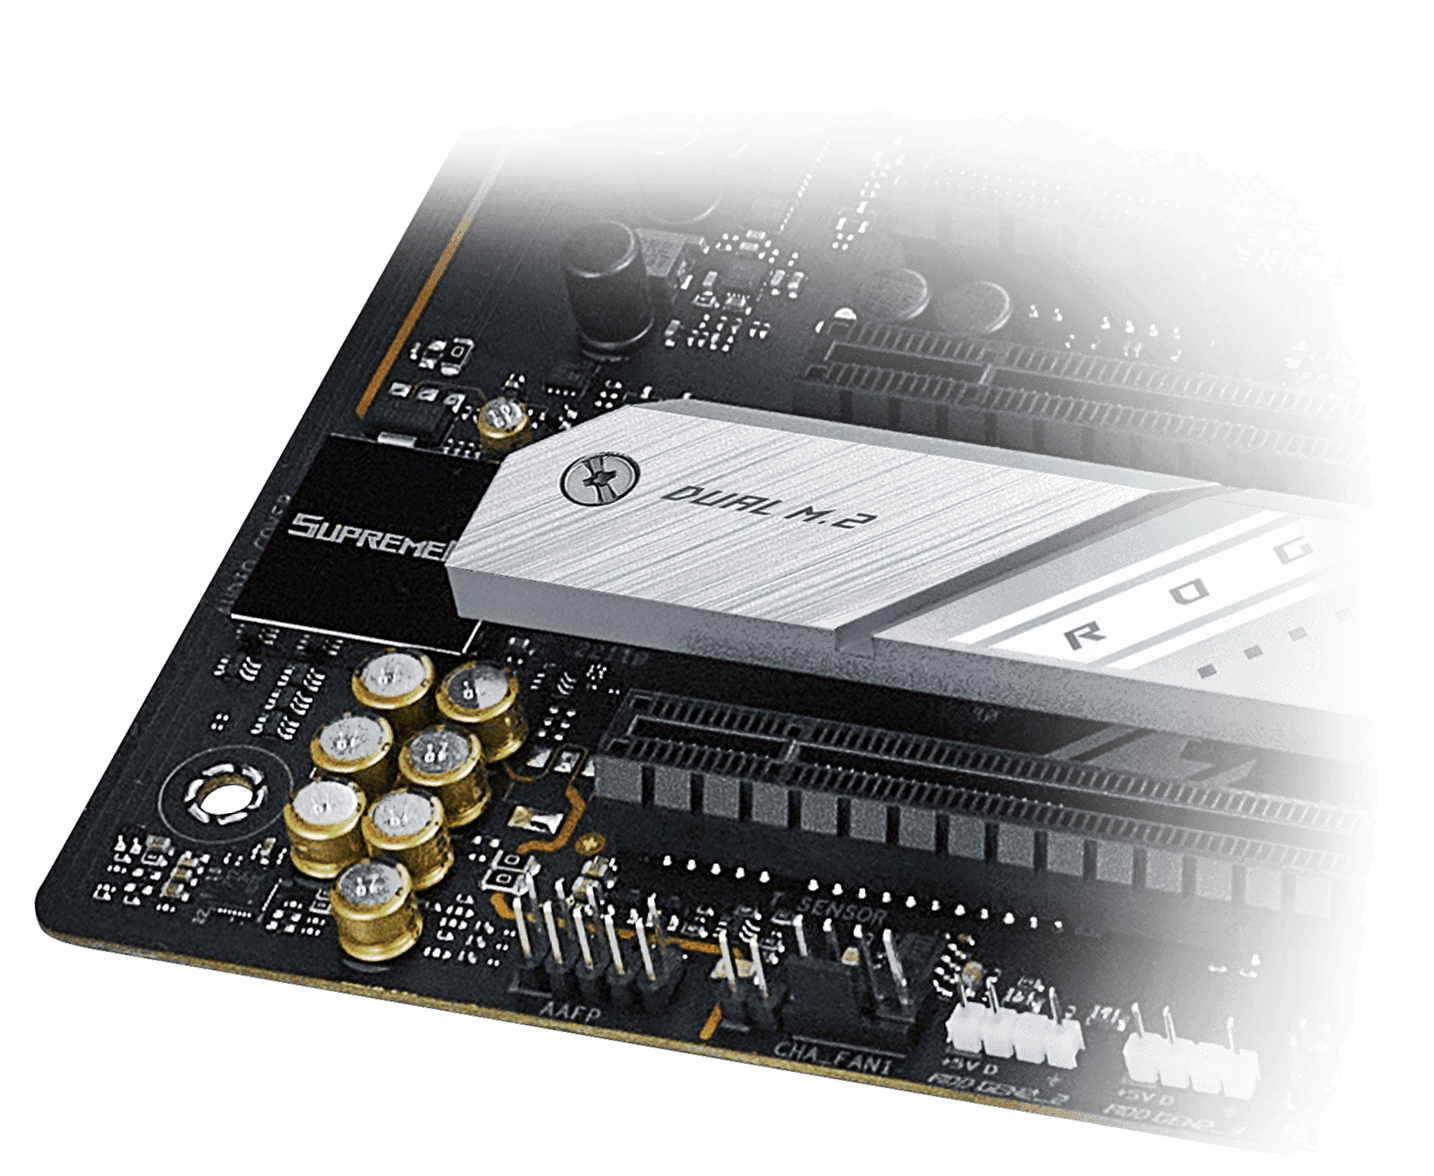 The Strix Z790-A motherboard features SupremeFX audio.